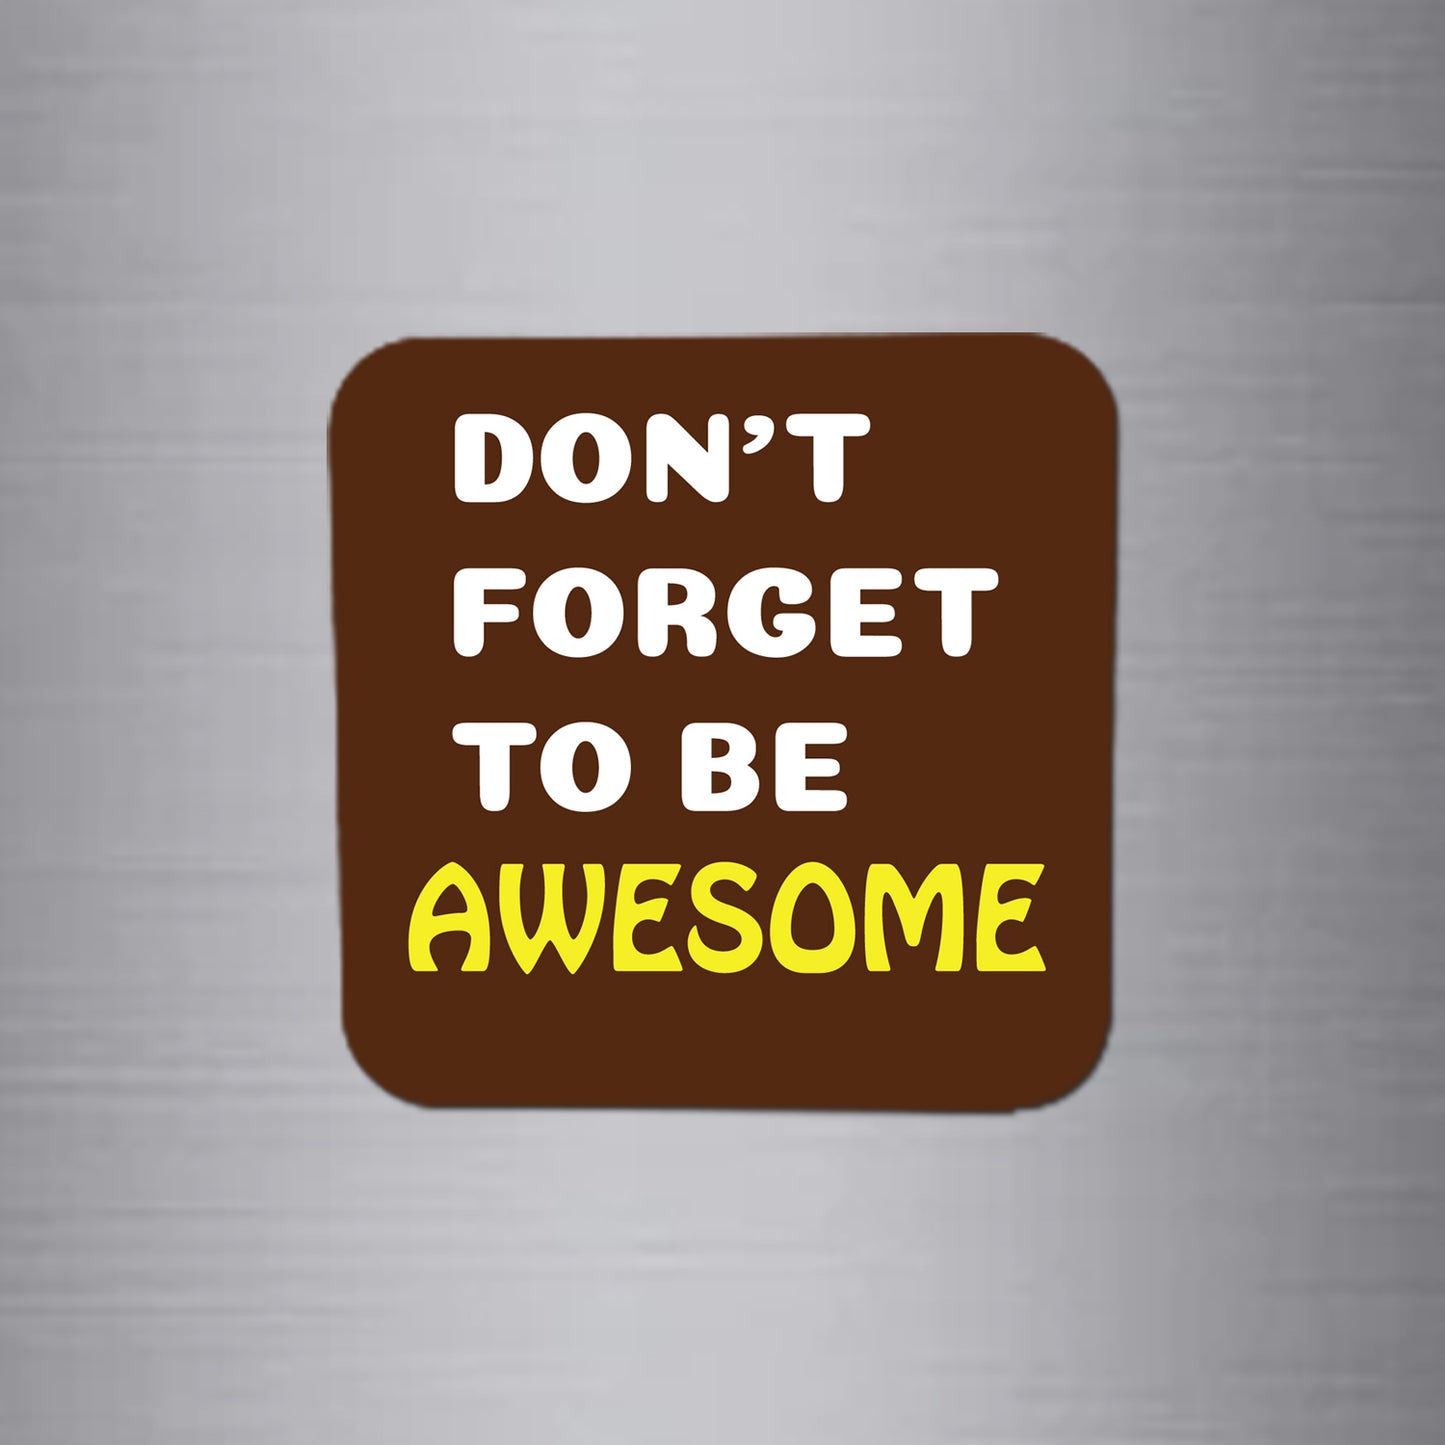 Fridge Magnet | Don't Forget to Be Awesome - FM048